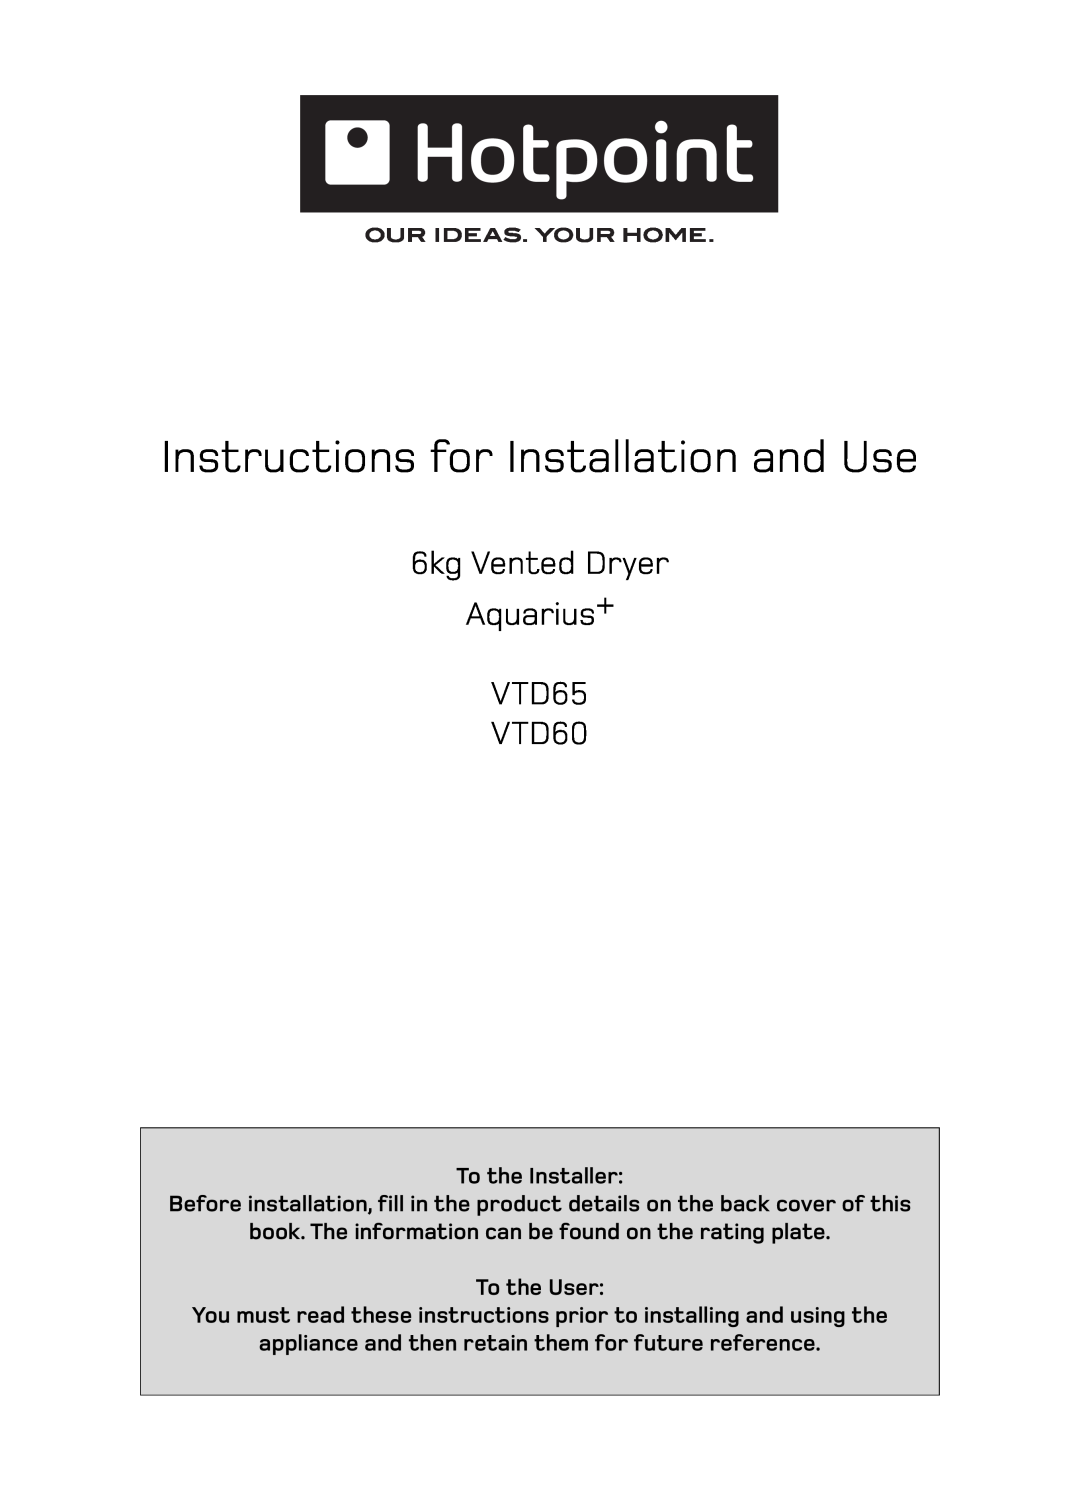 Hotpoint VTD65, VTD60 manual To the Installer, book. The information can be found on the rating plate To the User 